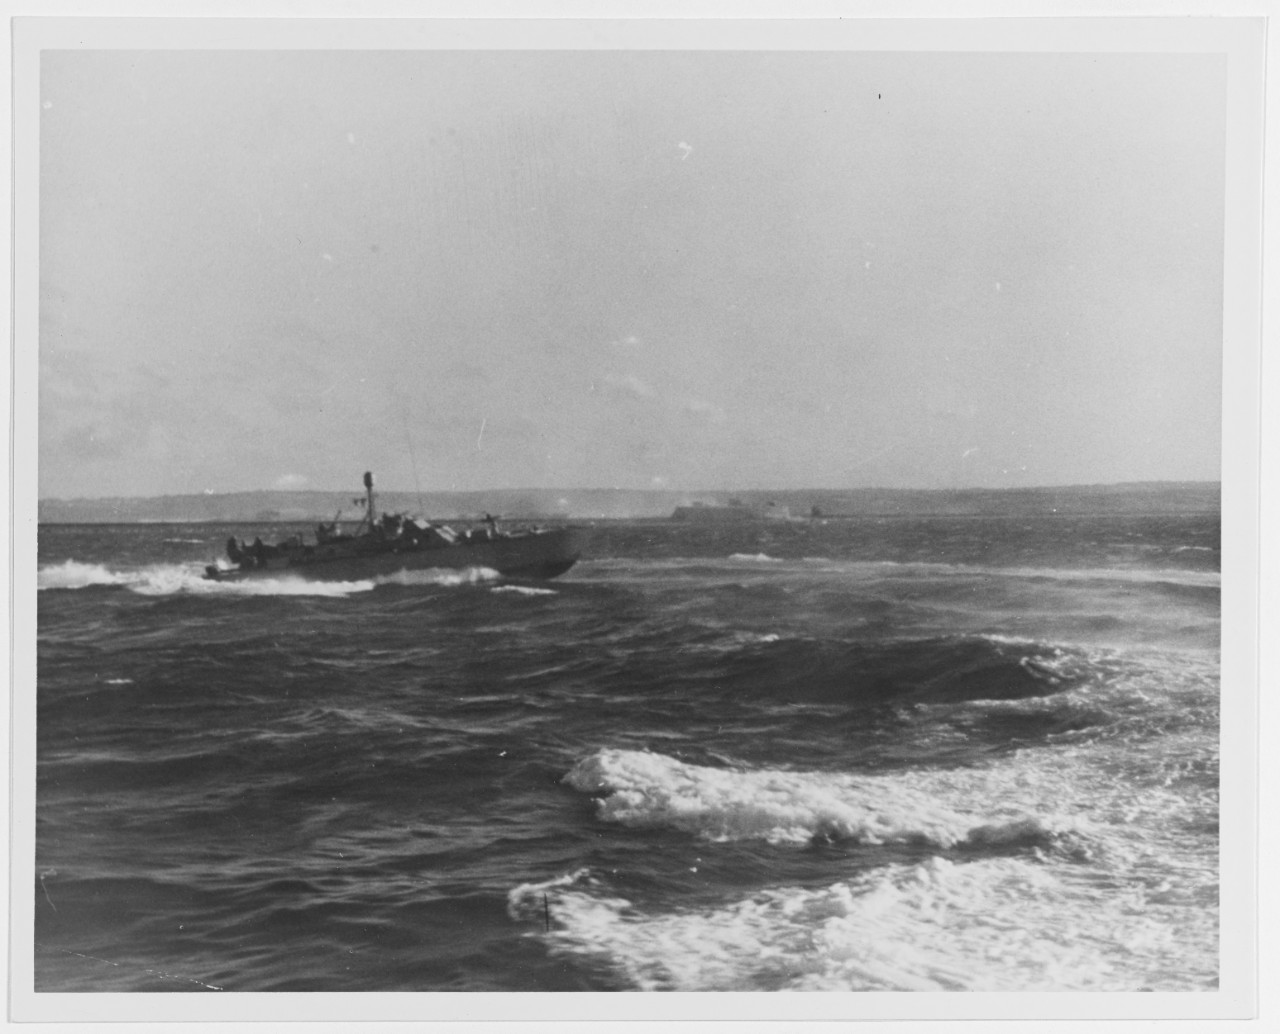 Photo #: NH 44309  Cherbourg Campaign, June 1944